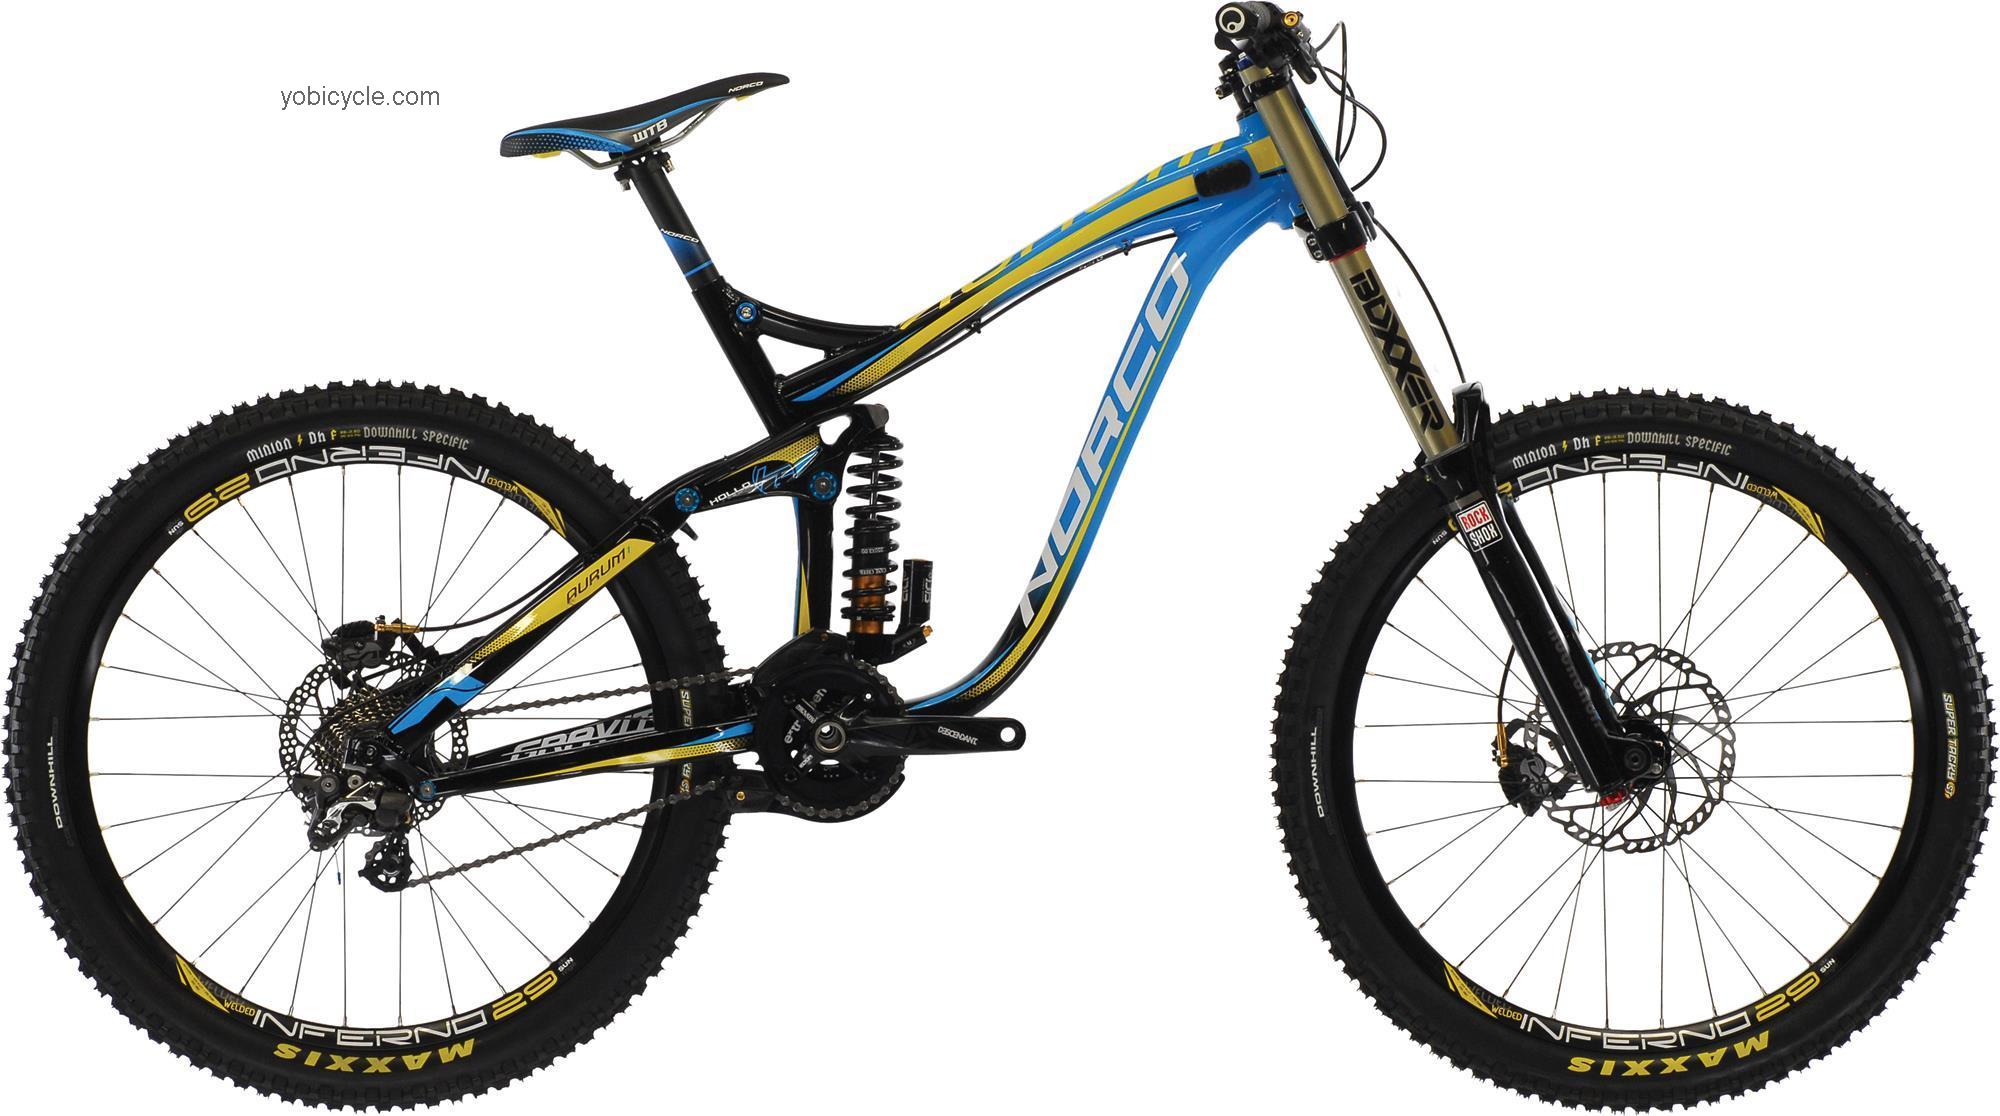 Norco Aurom 1 2013 comparison online with competitors